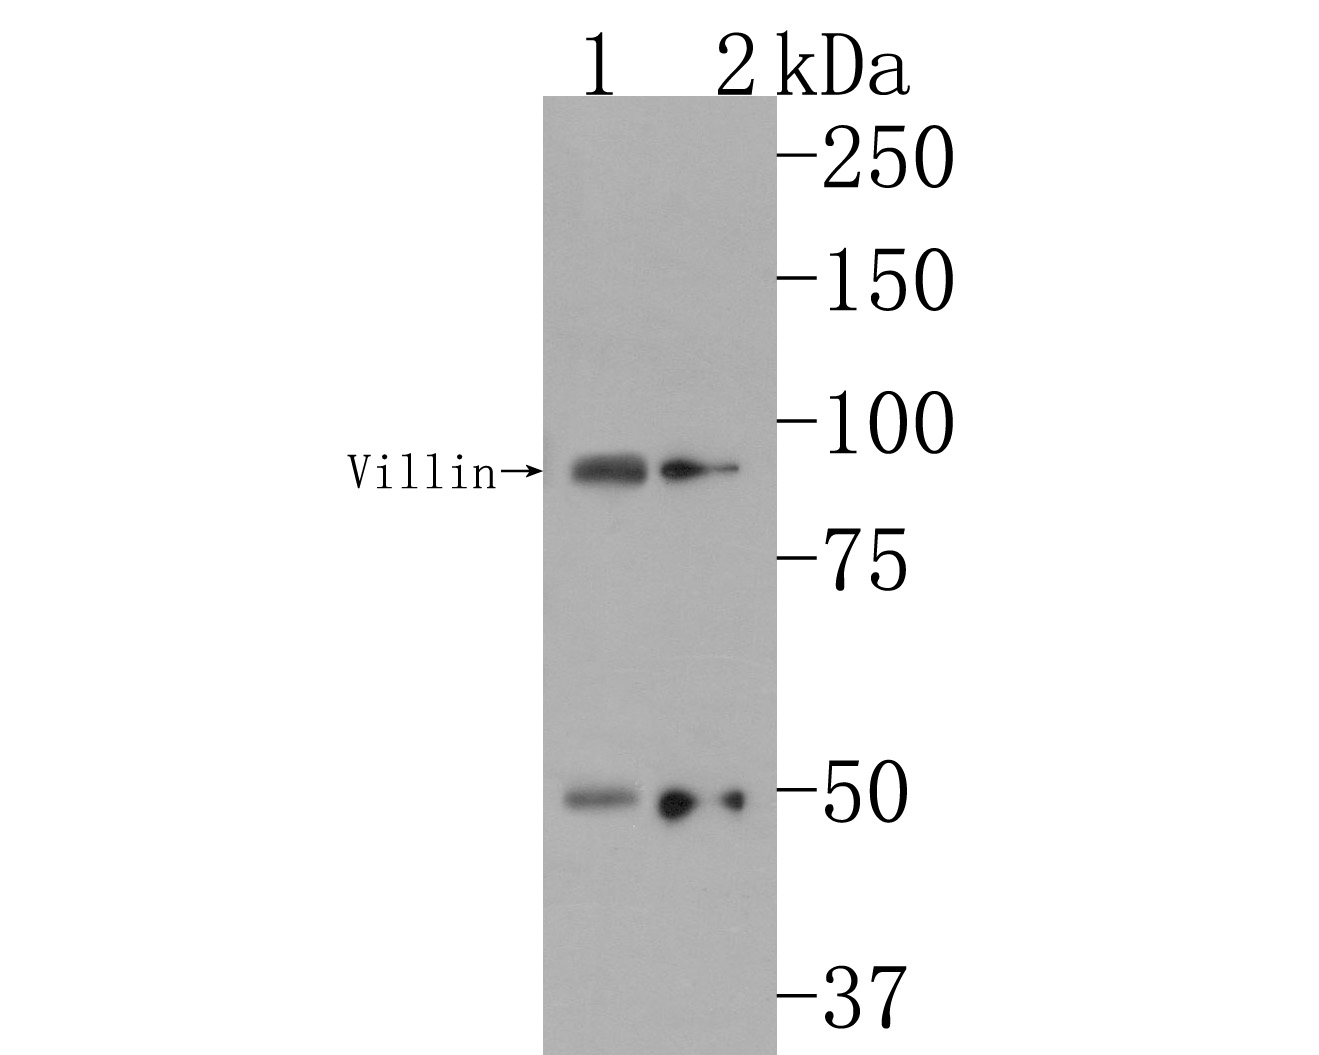 Western blot analysis of Villin1 on different lysates. Proteins were transferred to a PVDF membrane and blocked with 5% BSA in PBS for 1 hour at room temperature. The primary antibody (HA500509, 1/1,000) was used in 5% BSA at room temperature for 2 hours. Goat Anti-Rabbit IgG - HRP Secondary Antibody (HA1001) at 1:200,000 dilution was used for 1 hour at room temperature.<br />
Positive control: <br />
Lane 1: Human kidney tissue lysate<br />
Lane 2: 293 cell lysate